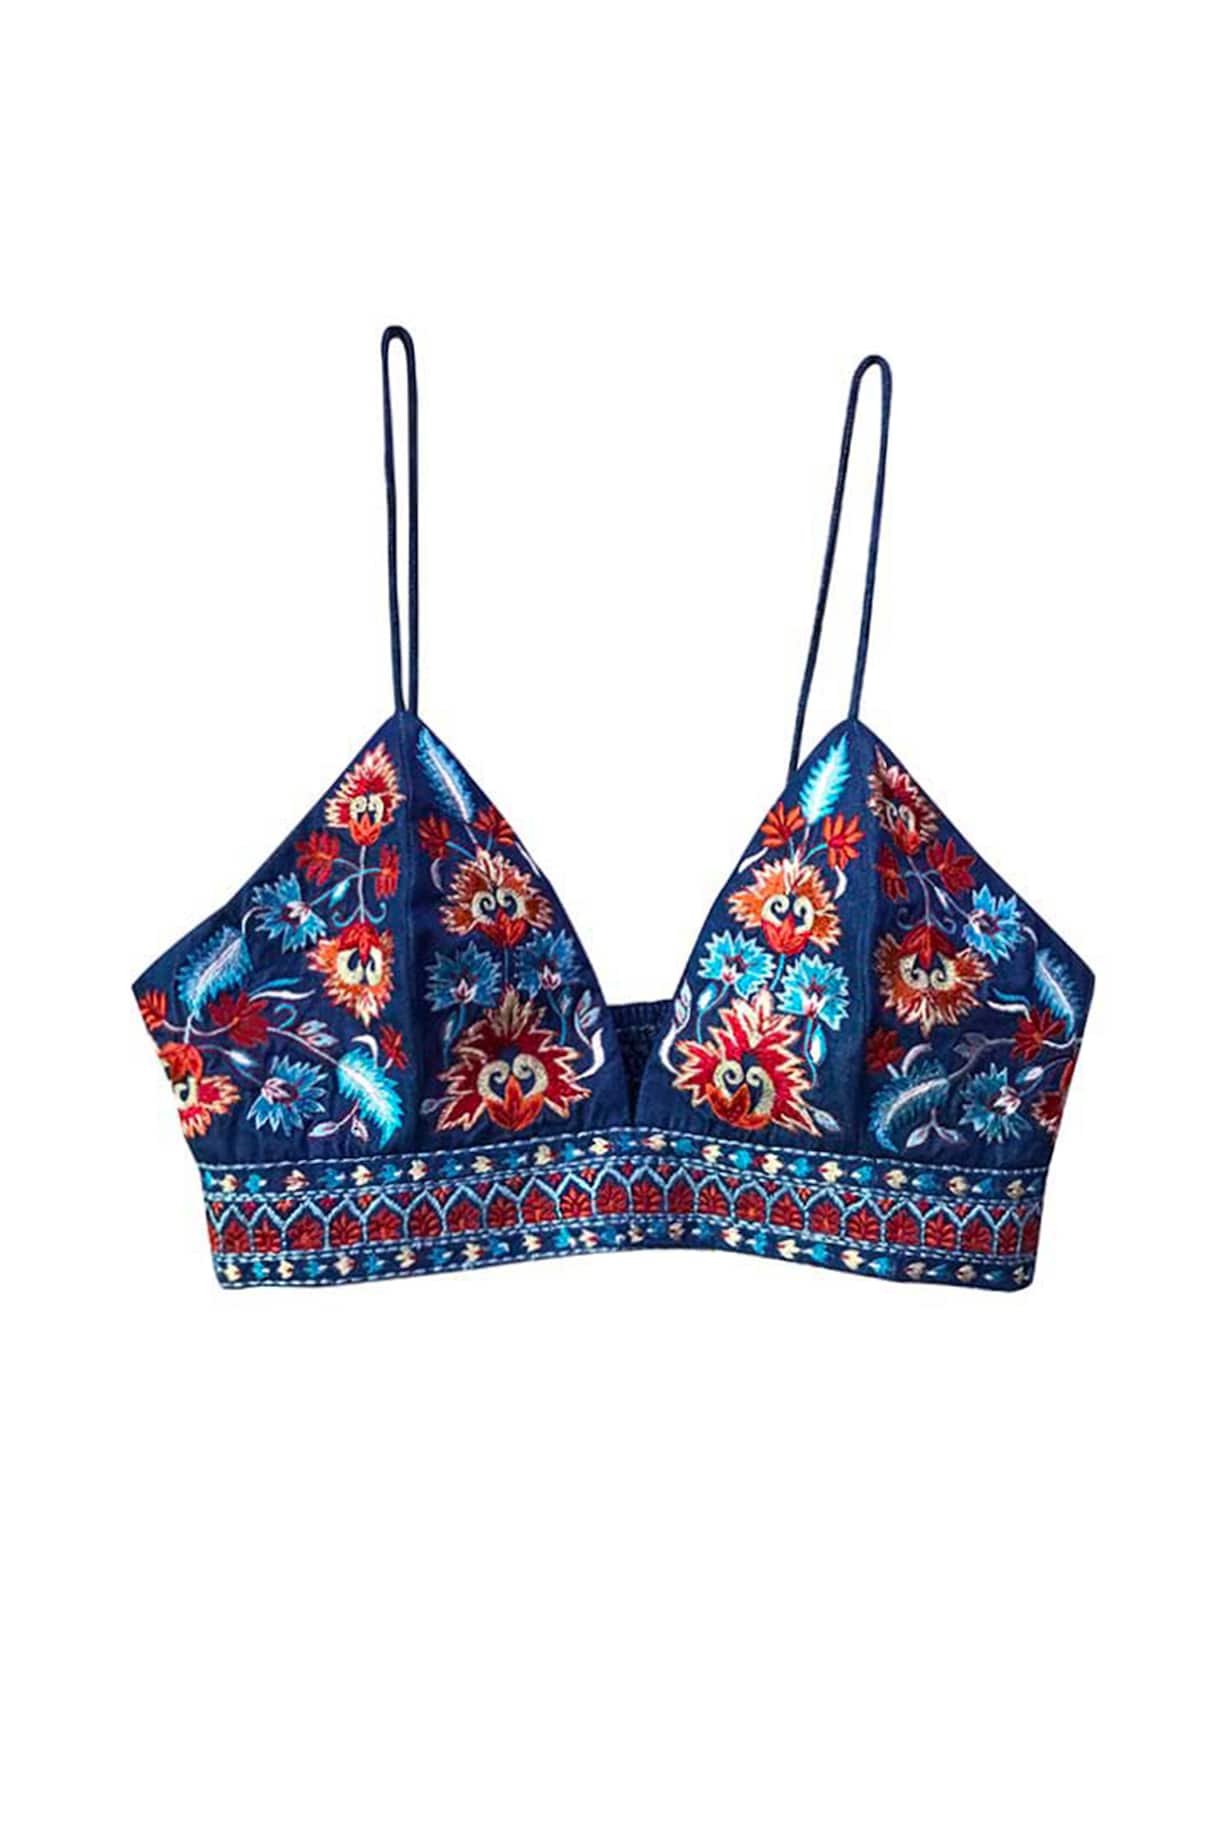 Denim Embroidered Bralette Design by Dash and Dot at Pernia's Pop Up Shop  2024